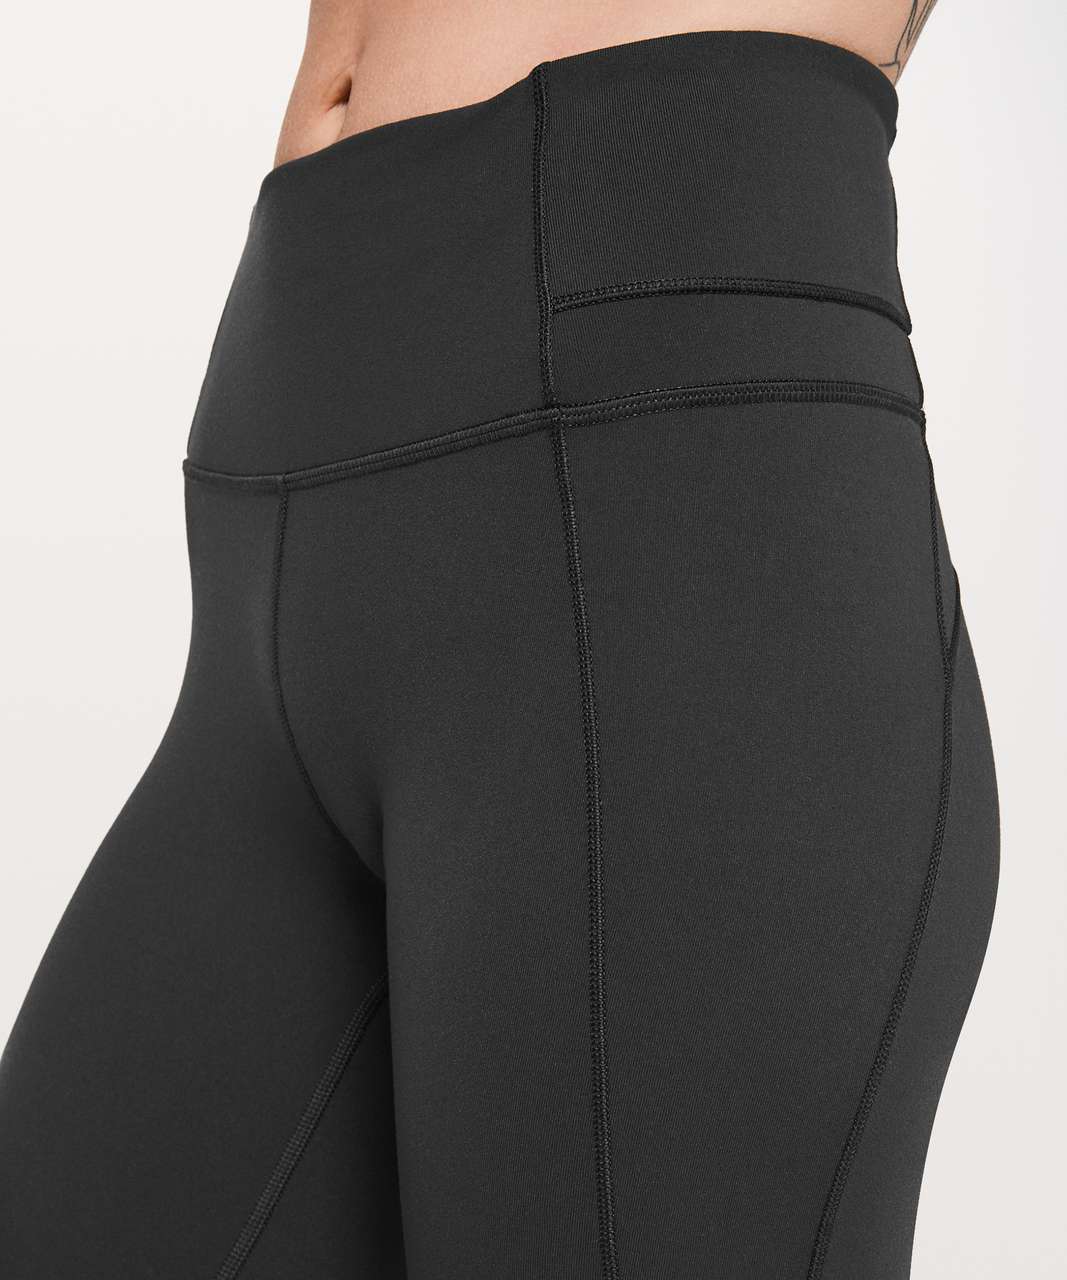 Lululemon Groove Pant Bootcut 32" - Black (First Release)